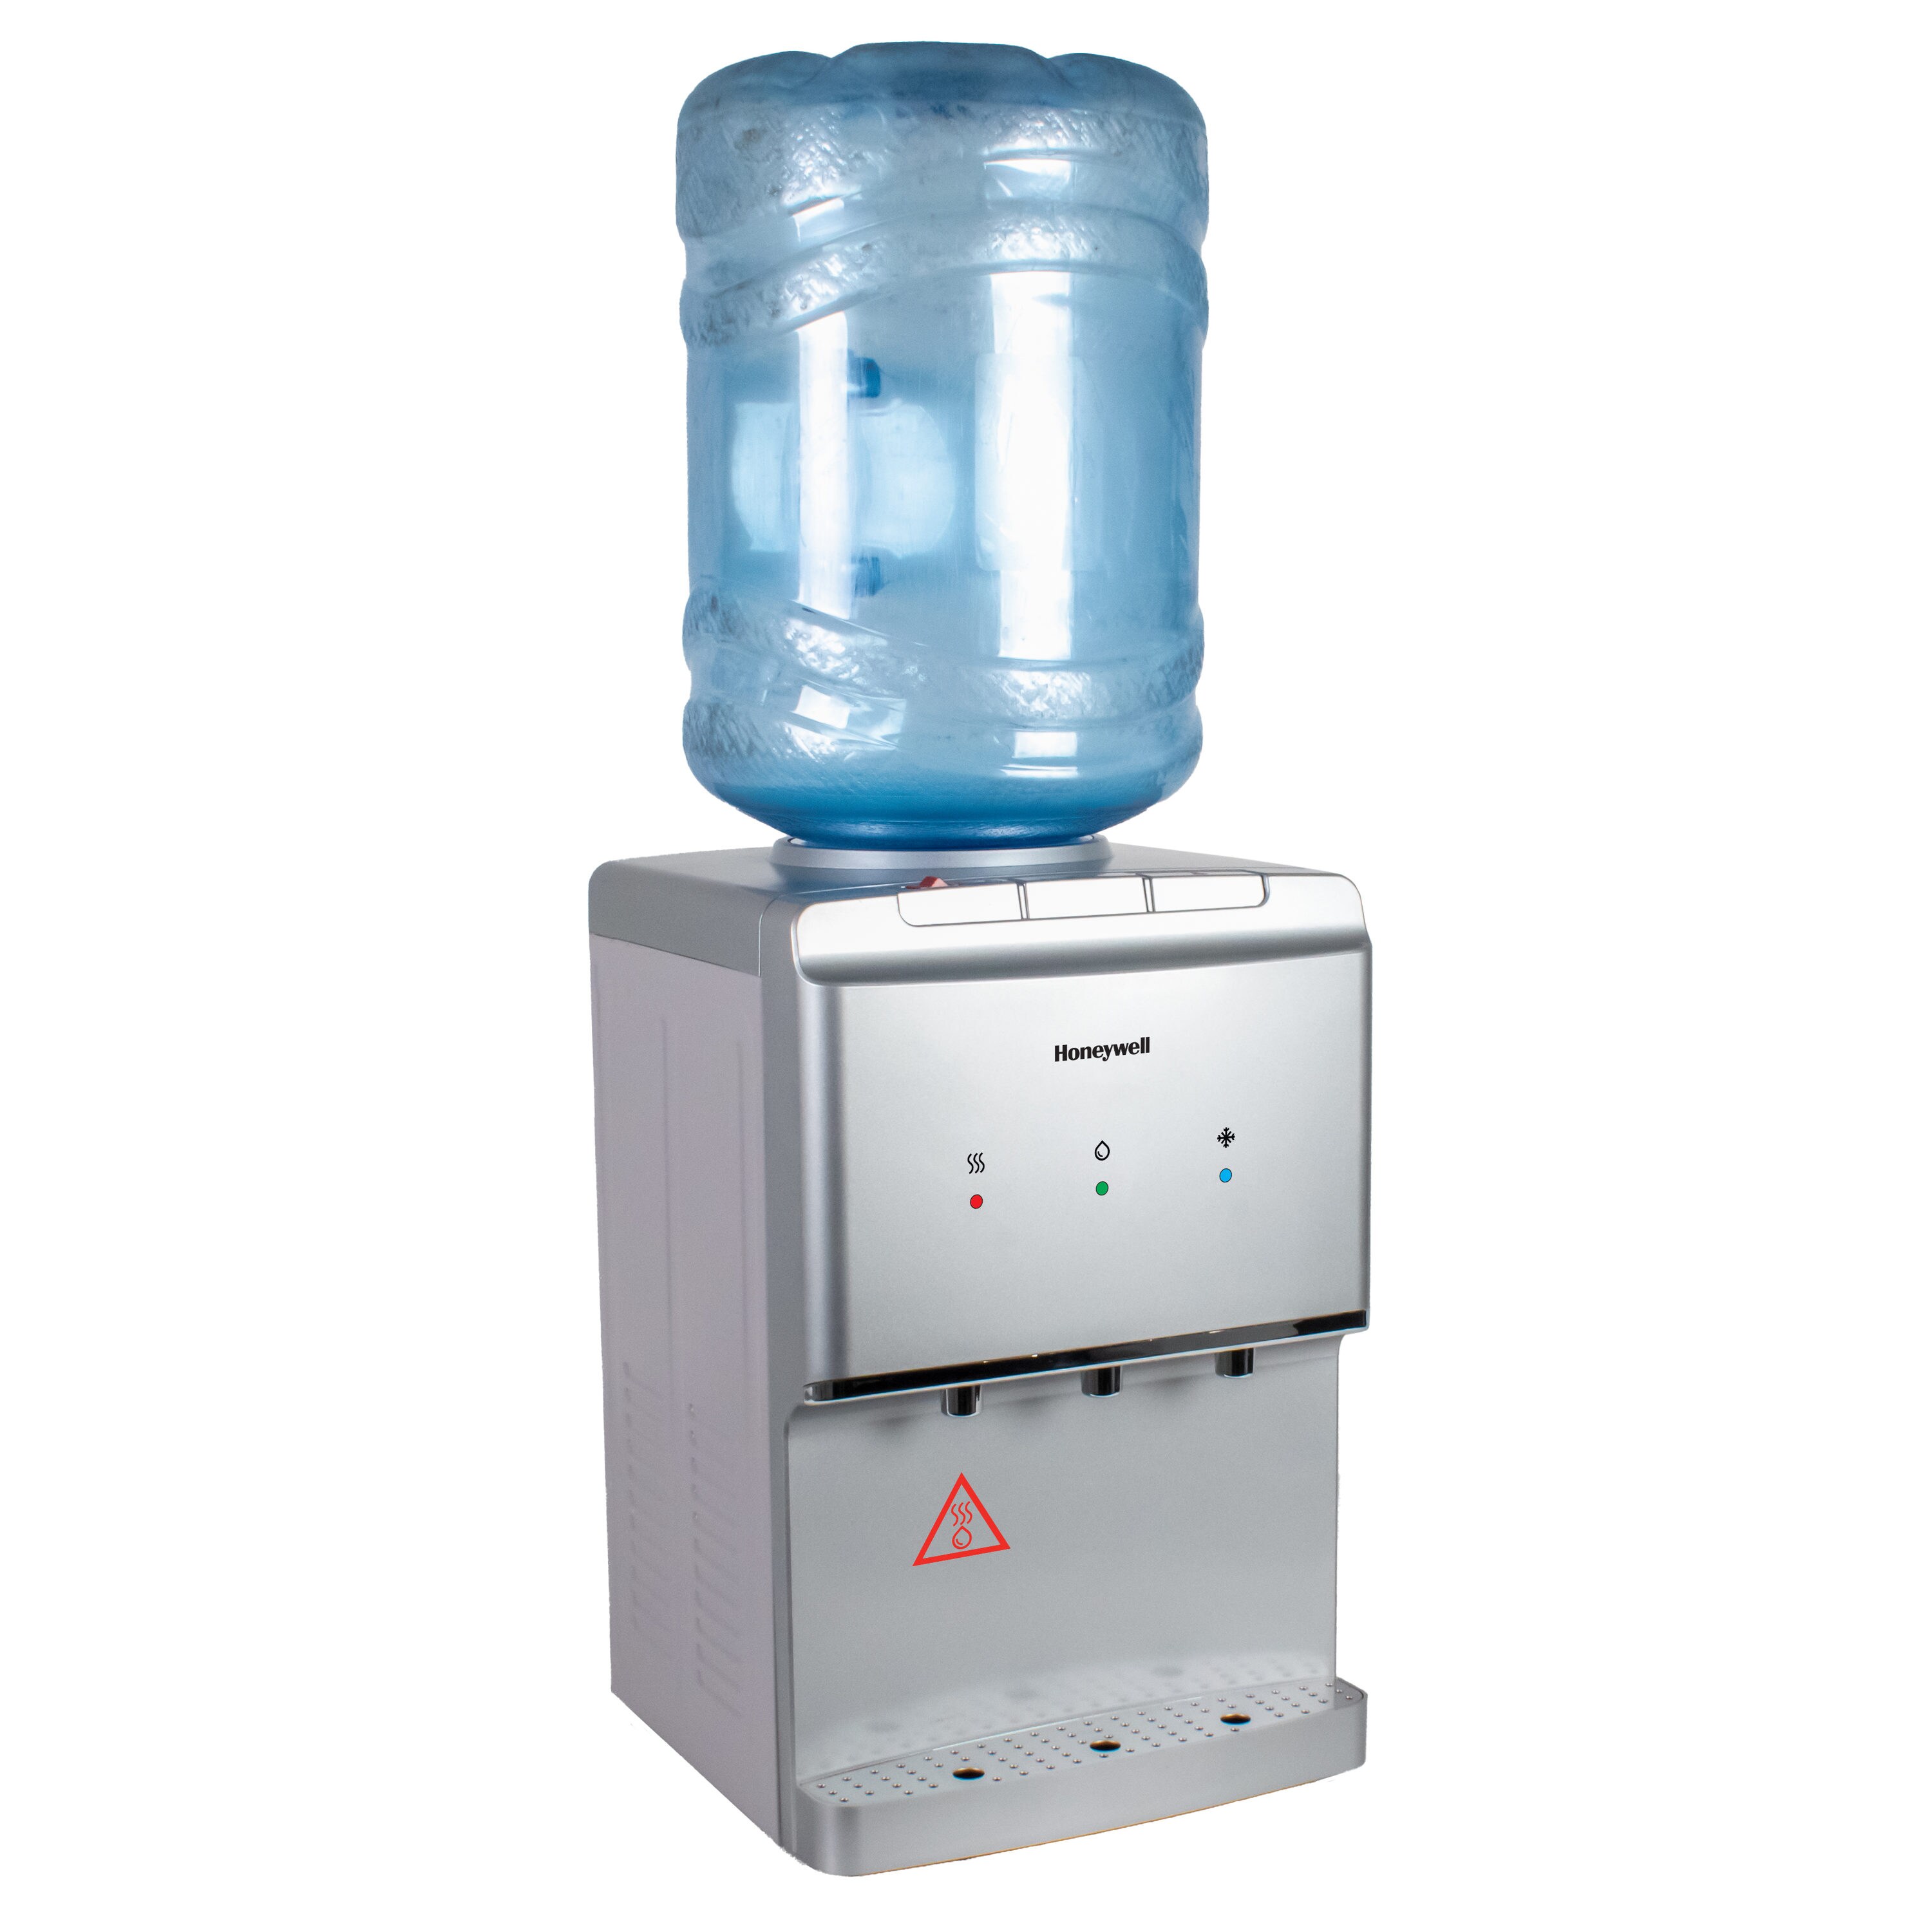 Top Loading Water Dispensers & Best Water Coolers Sale